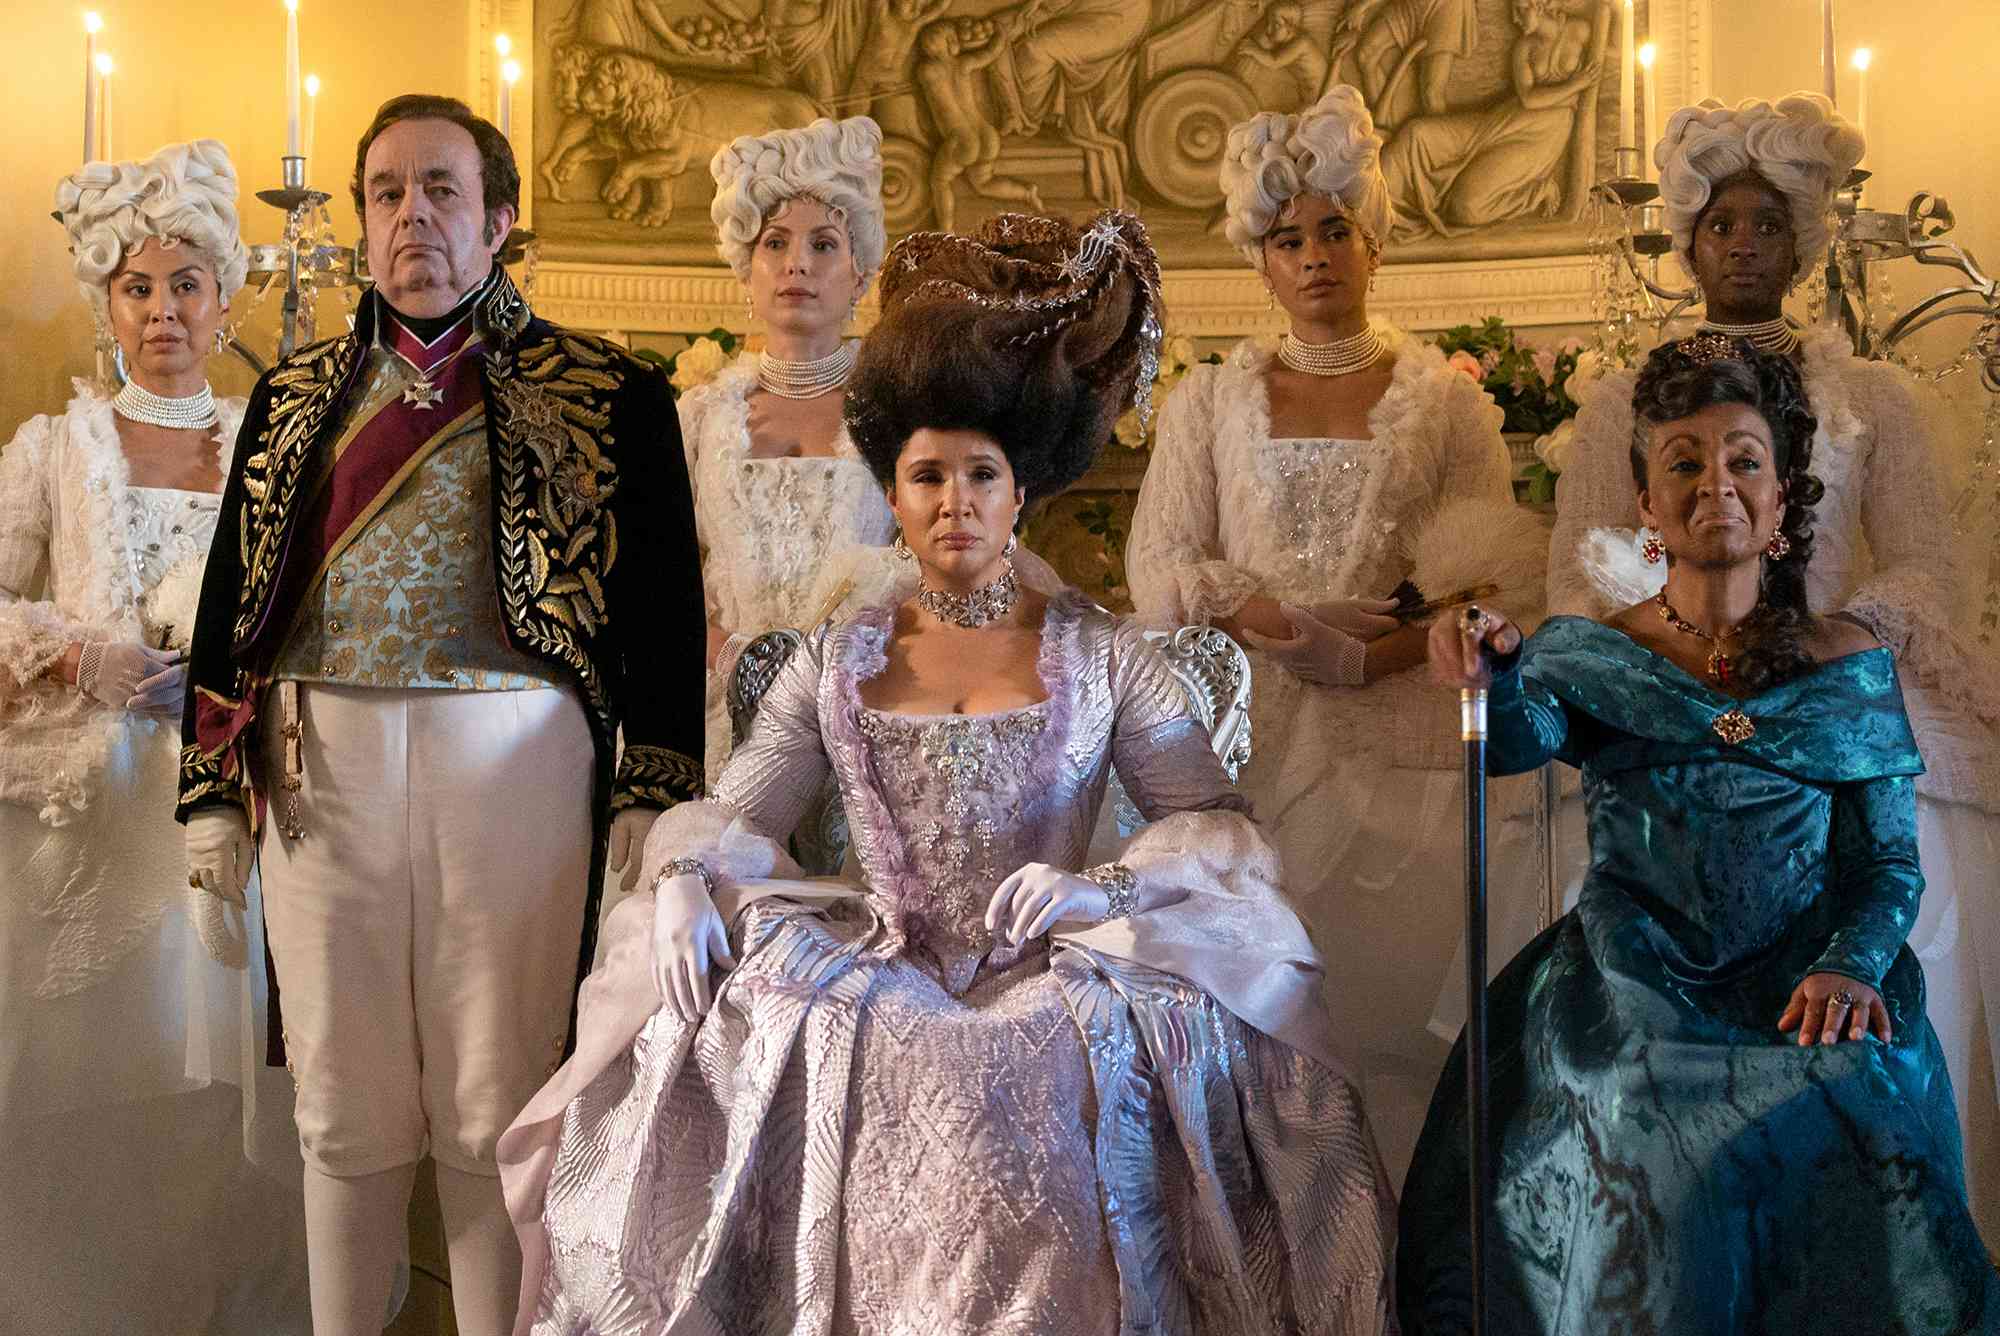 How Accurate Is “Bridgerton”? We Asked a Regency Historian What the Series Gets Right (and Wrong)